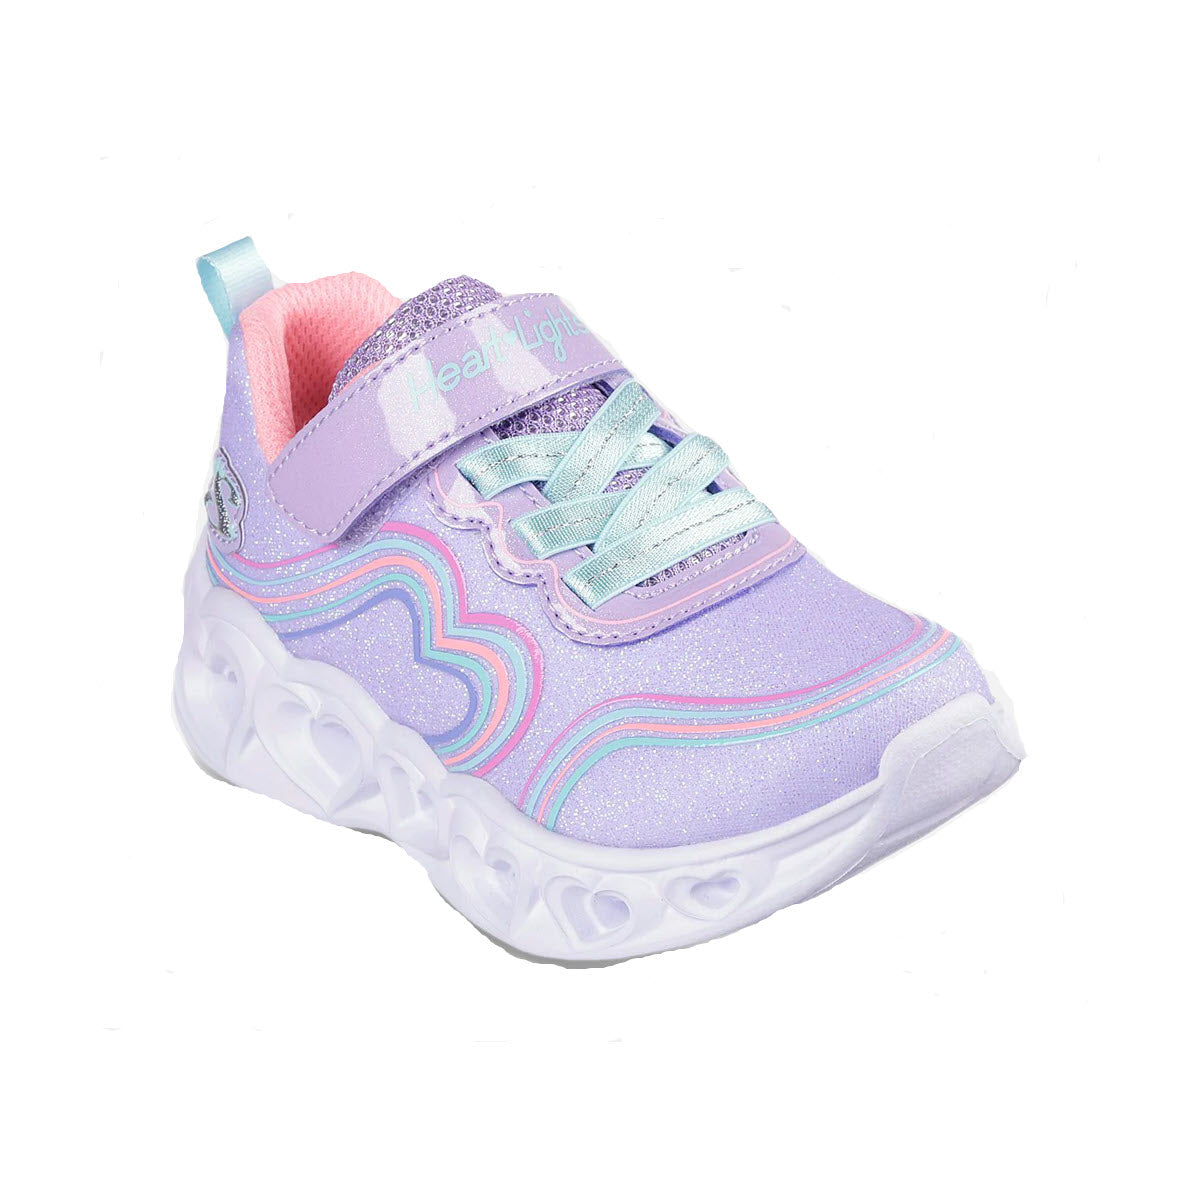 A child&#39;s pink and purple Skechers Heart Lights Retro Hearts Lavender Multi sneaker with glitter details and white soles, featuring a roller embedded in the heel.